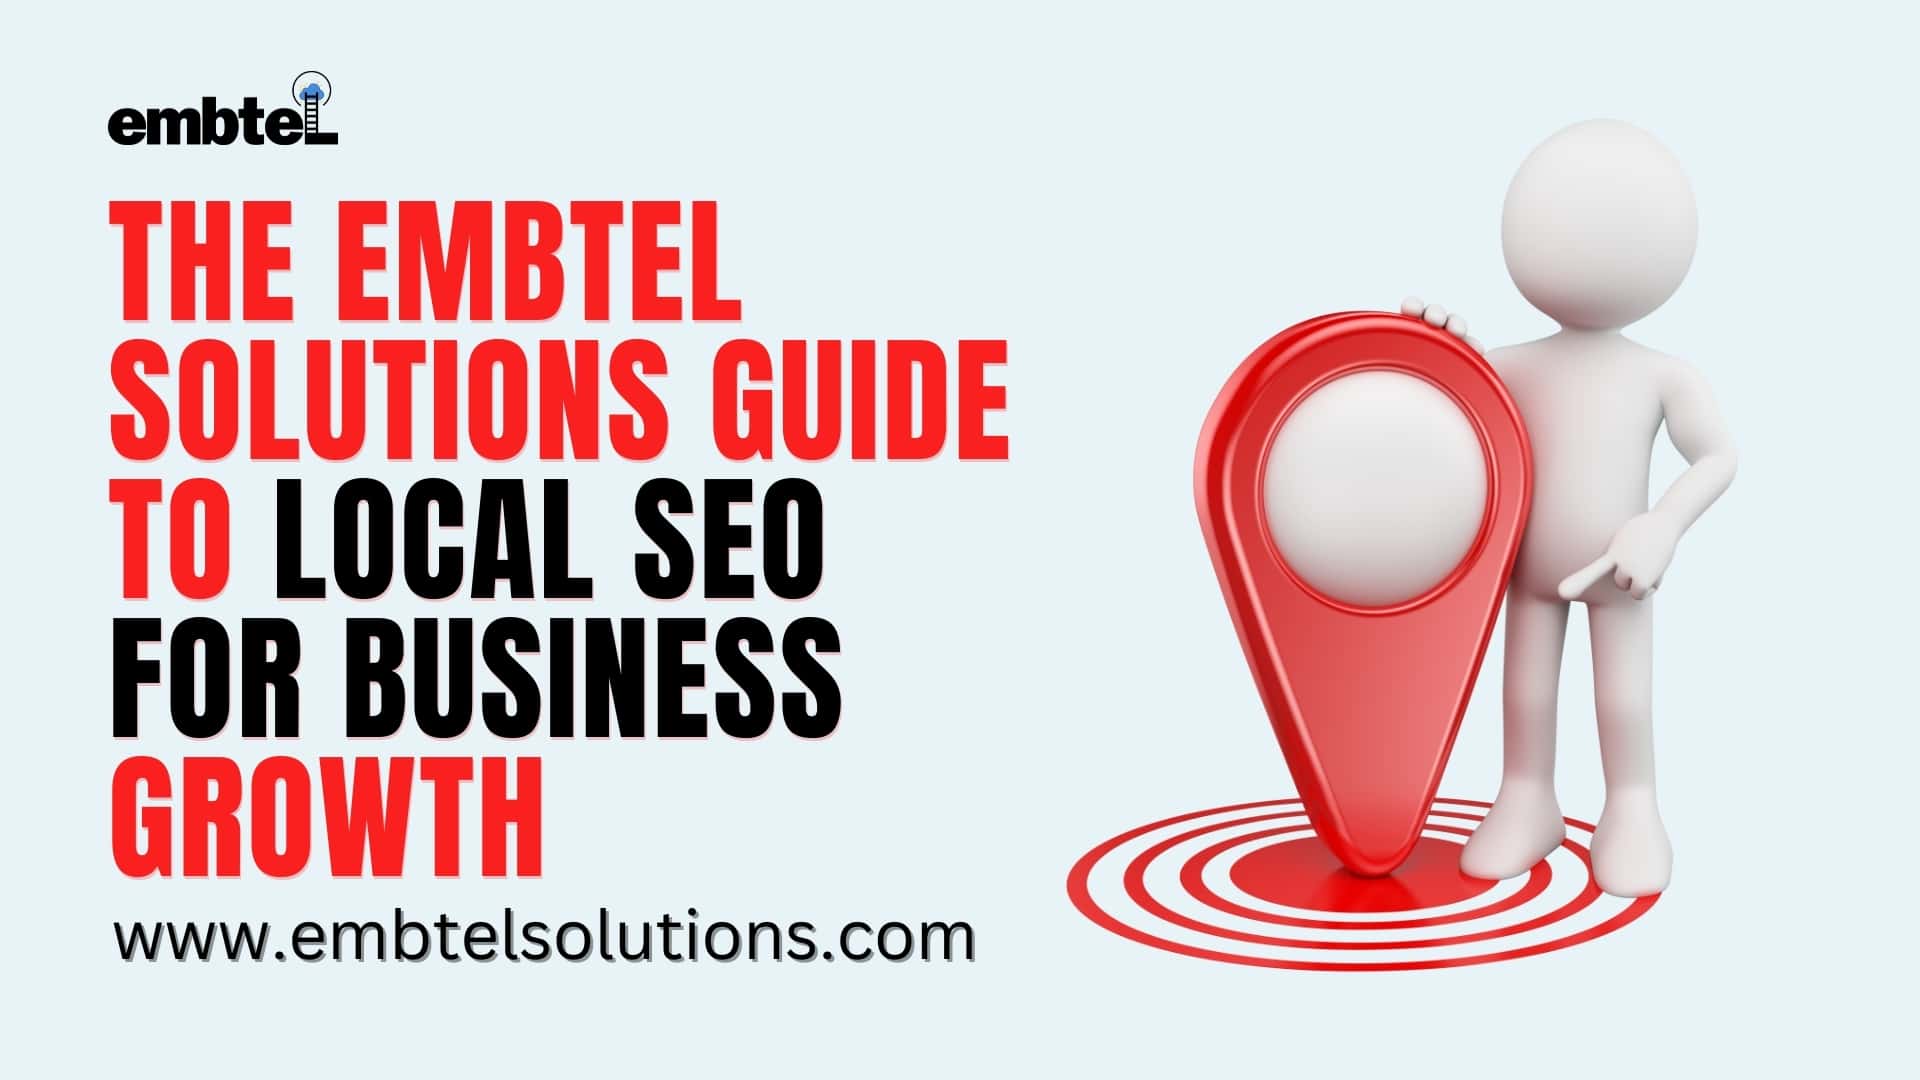 The Embtel Solutions Guide to Local SEO for Business Growth  